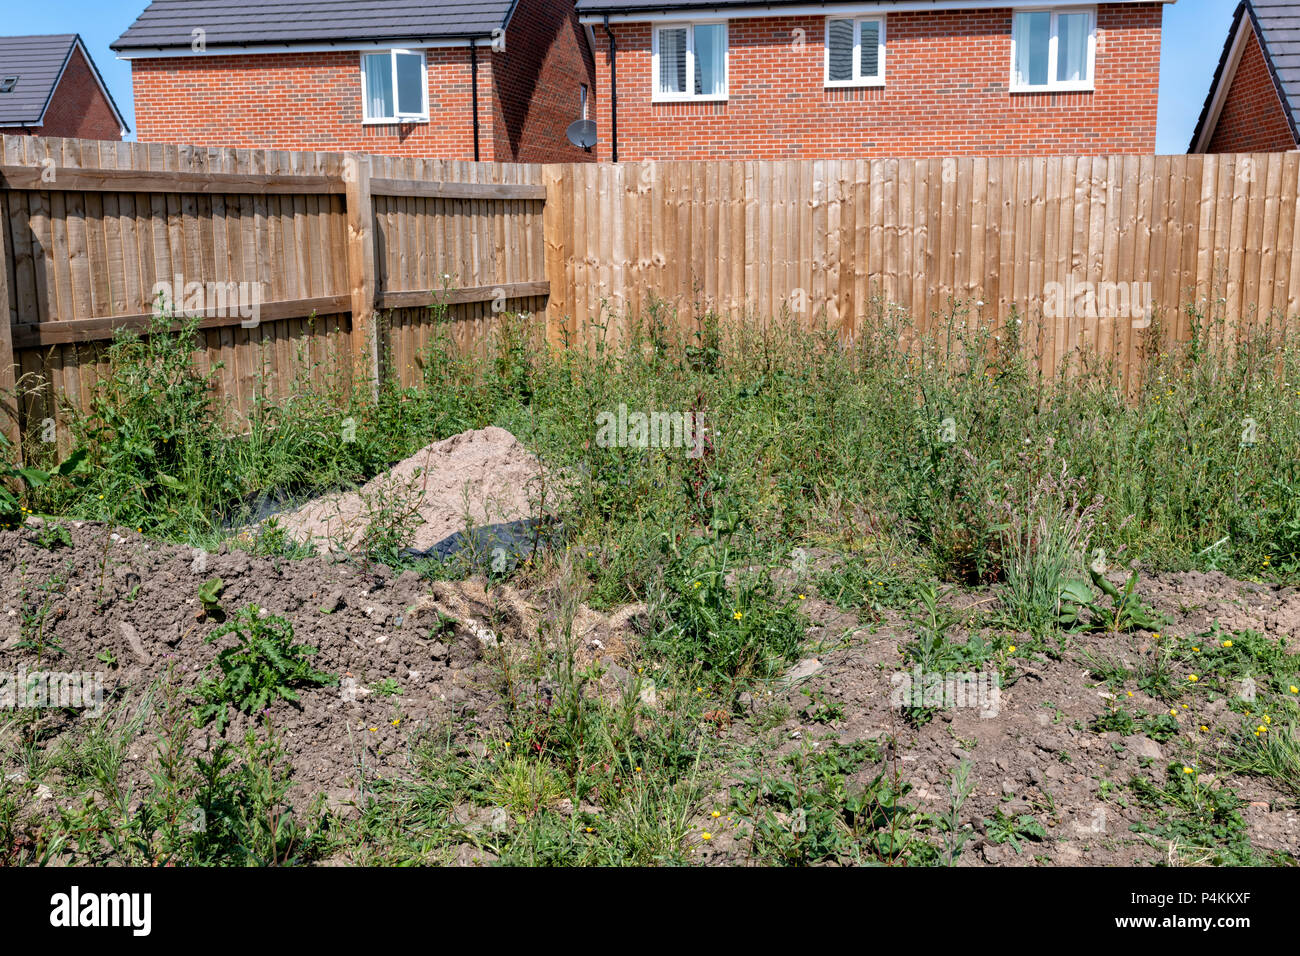 Garden of a new build house overgrown with weeds Stock Photo